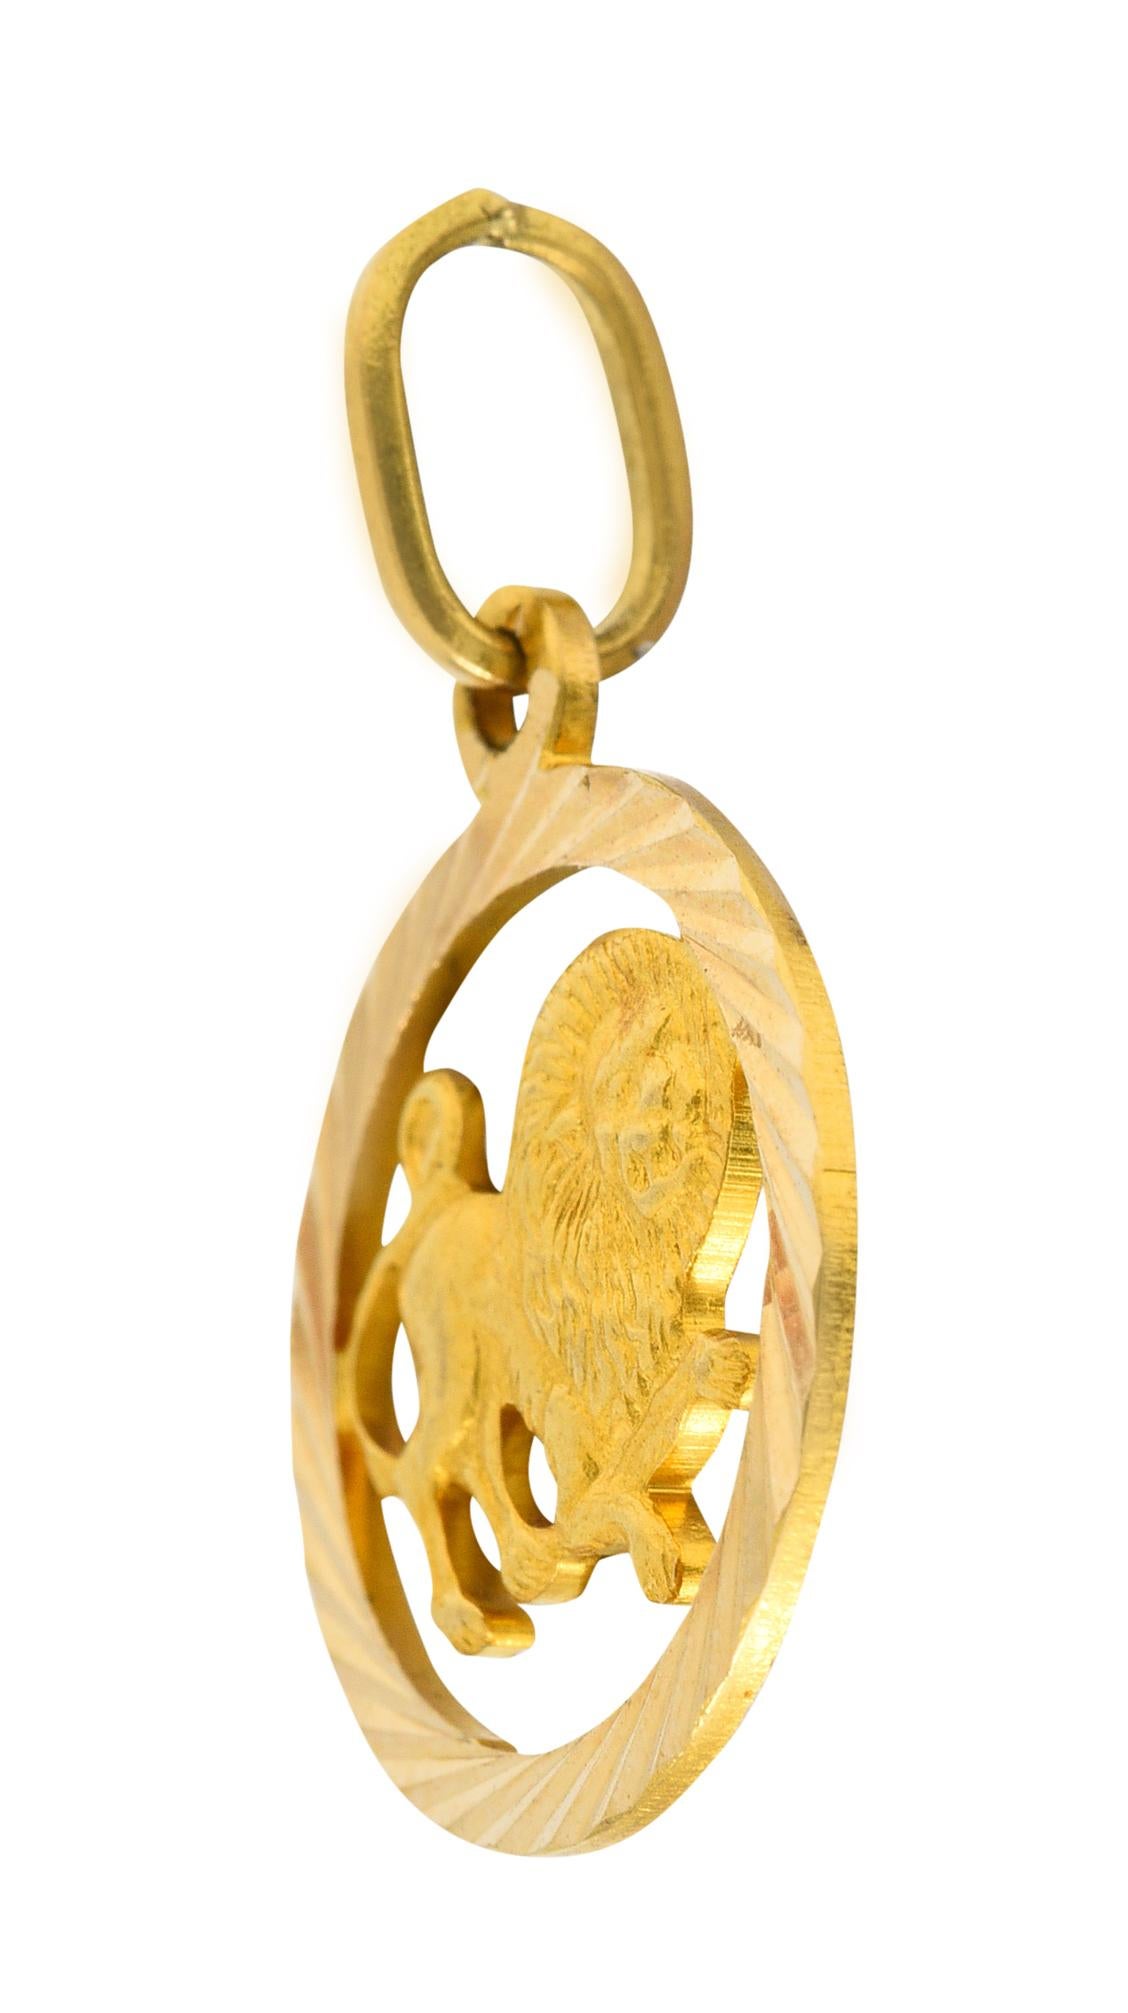 Designed as a pierced open circle with a deeply faceted surround

Centering a highly rendered image of a lion

With a wild mane and crouching posture

With Italian assay marks for 18 karat gold

Circa: 1970s

Measures: 11/16 x 1 inch (including jump